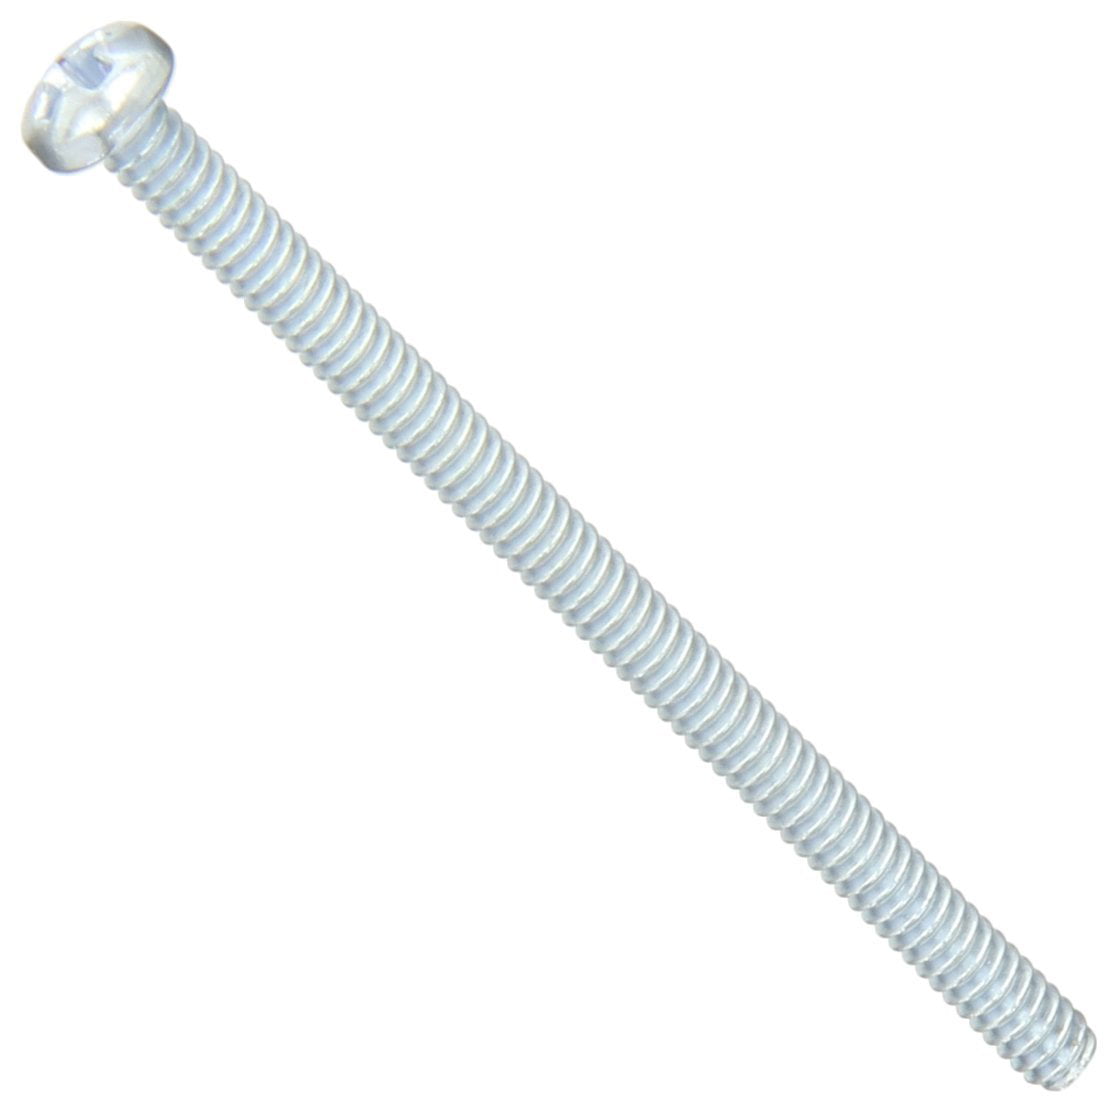 Steel Pan Head Machine Screw Meets ASME B18.6.3 #10-32 Thread Size Zinc Plated 1-3/8 Length Fully Threaded Pack of 3000 #2 Phillips Drive Imported